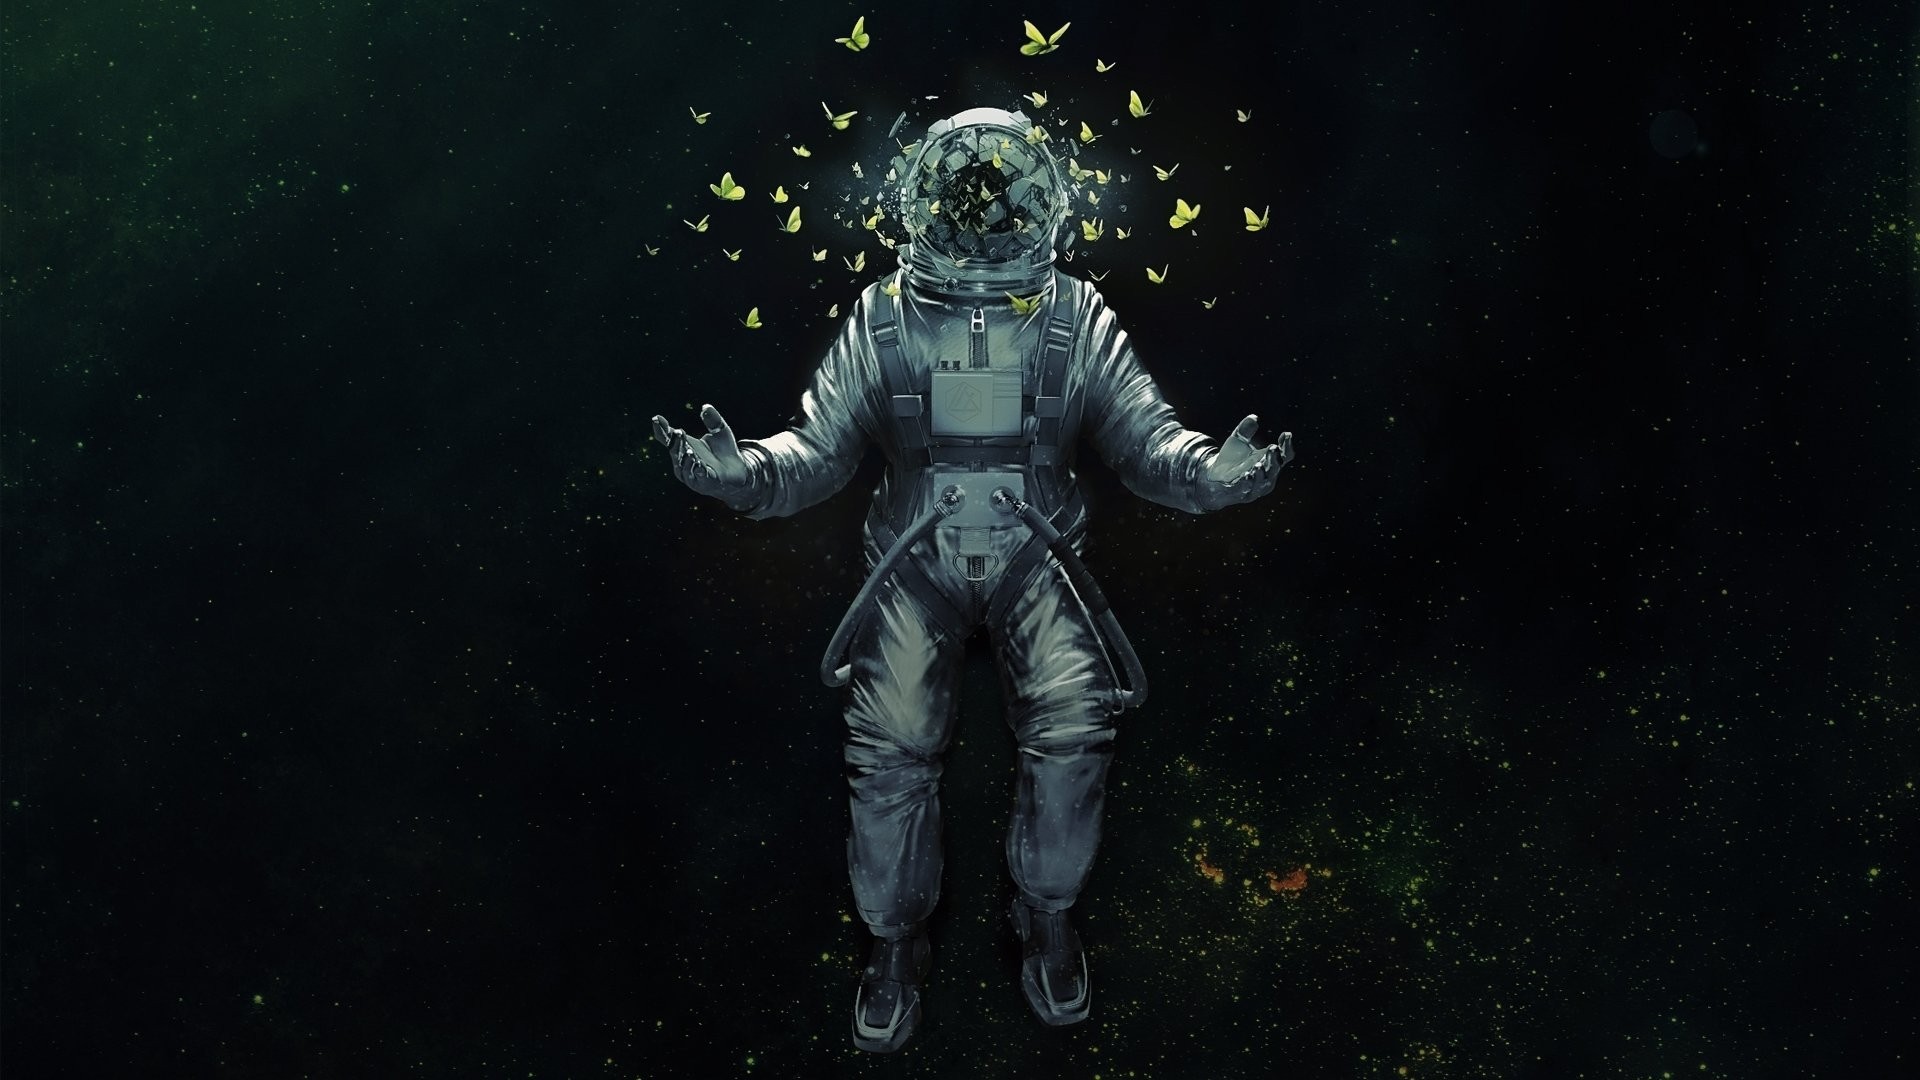 General 1920x1080 astronaut butterfly space stars broken glass frontal view